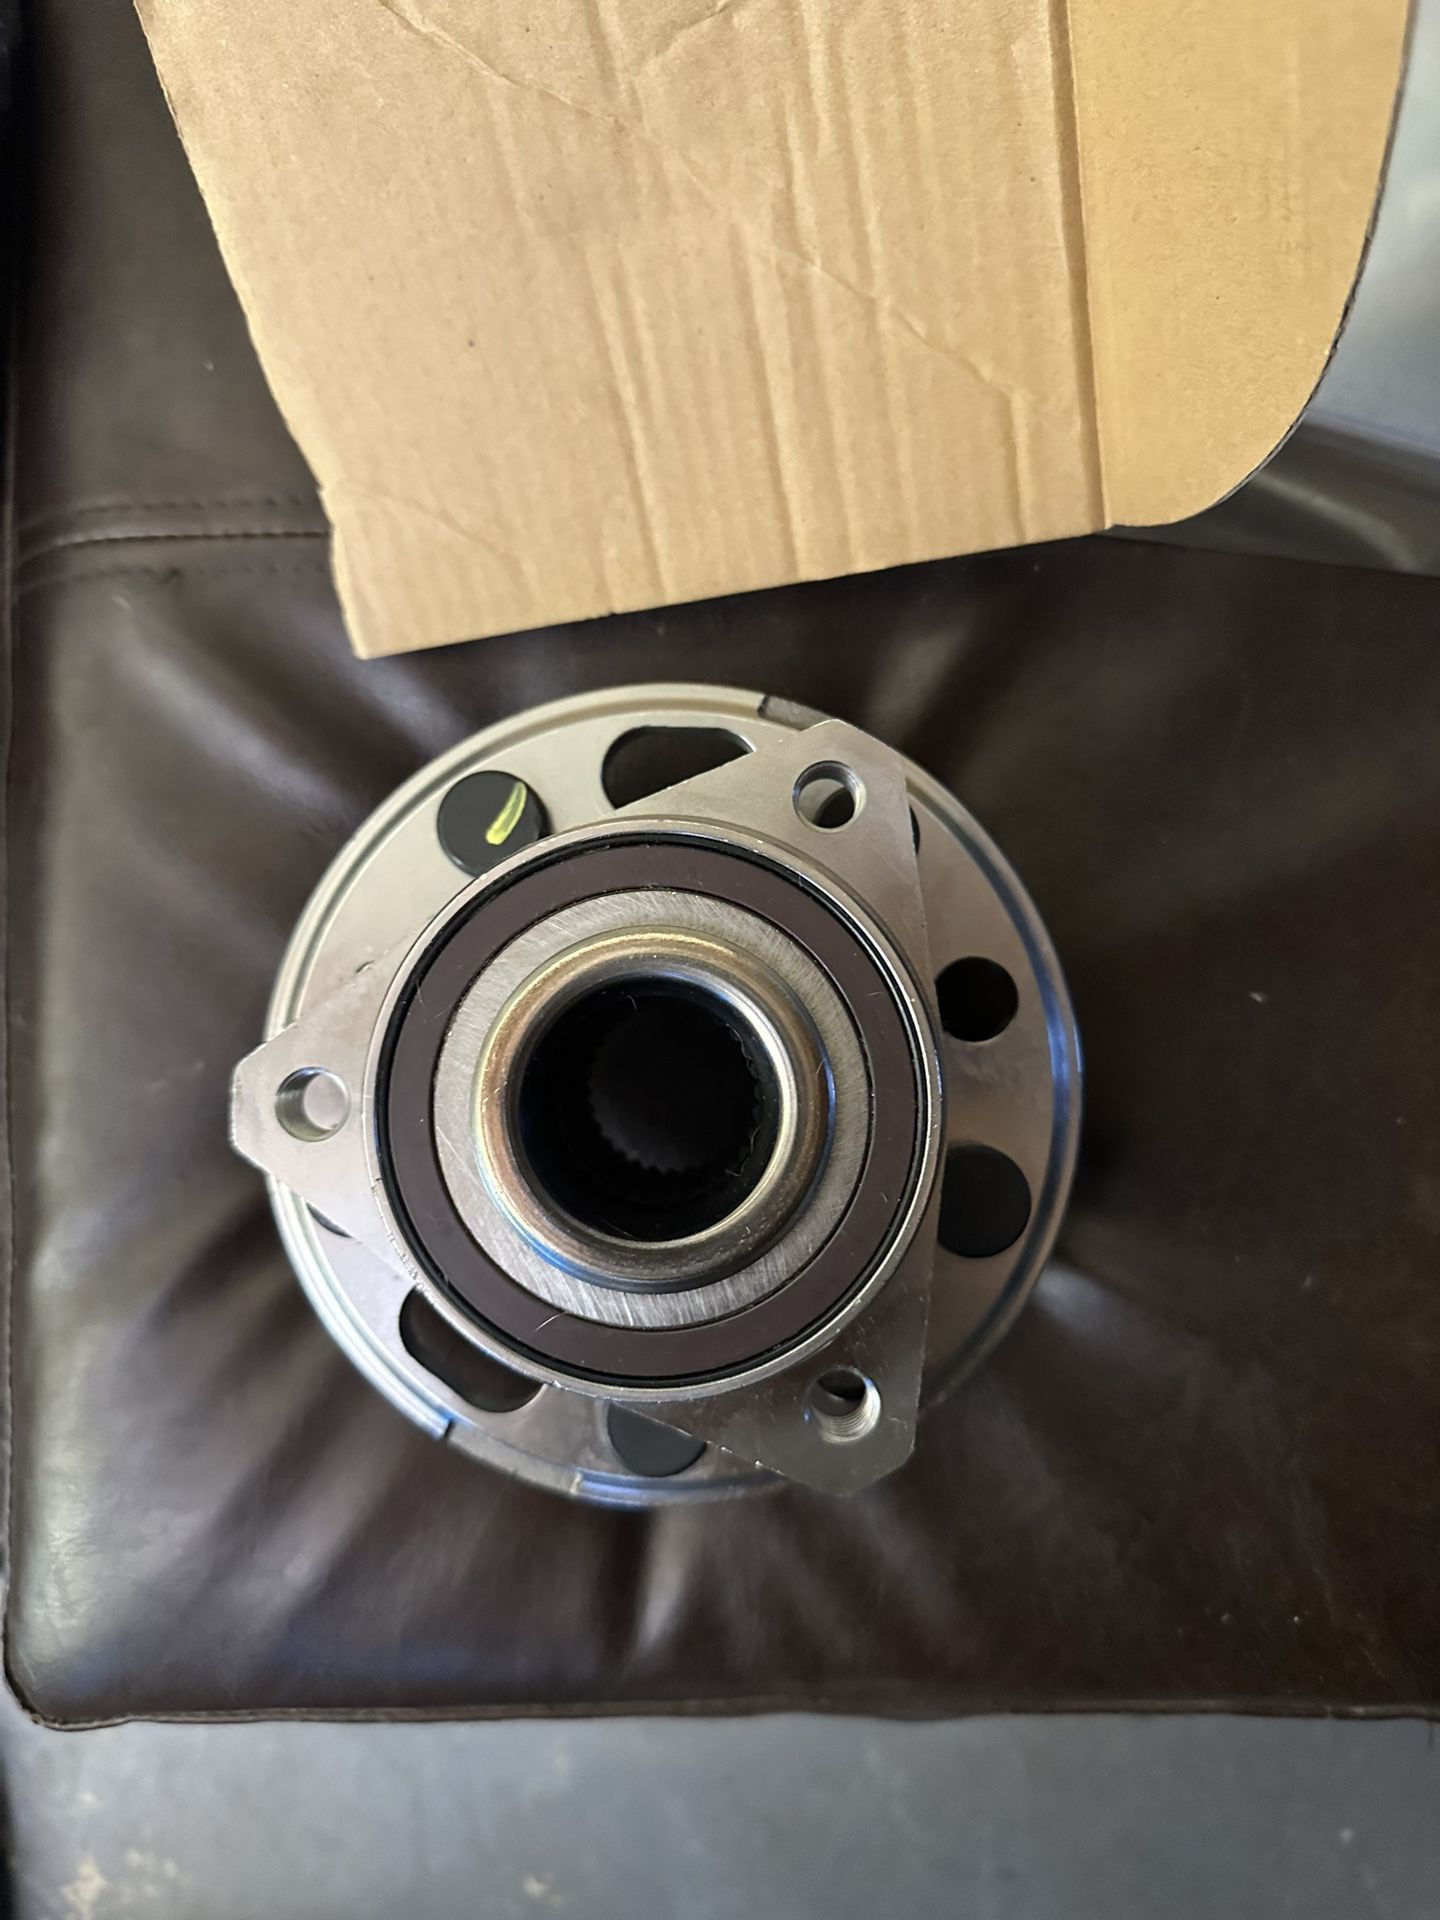 wheel Bearing for 2015 chevy malibu front driver side